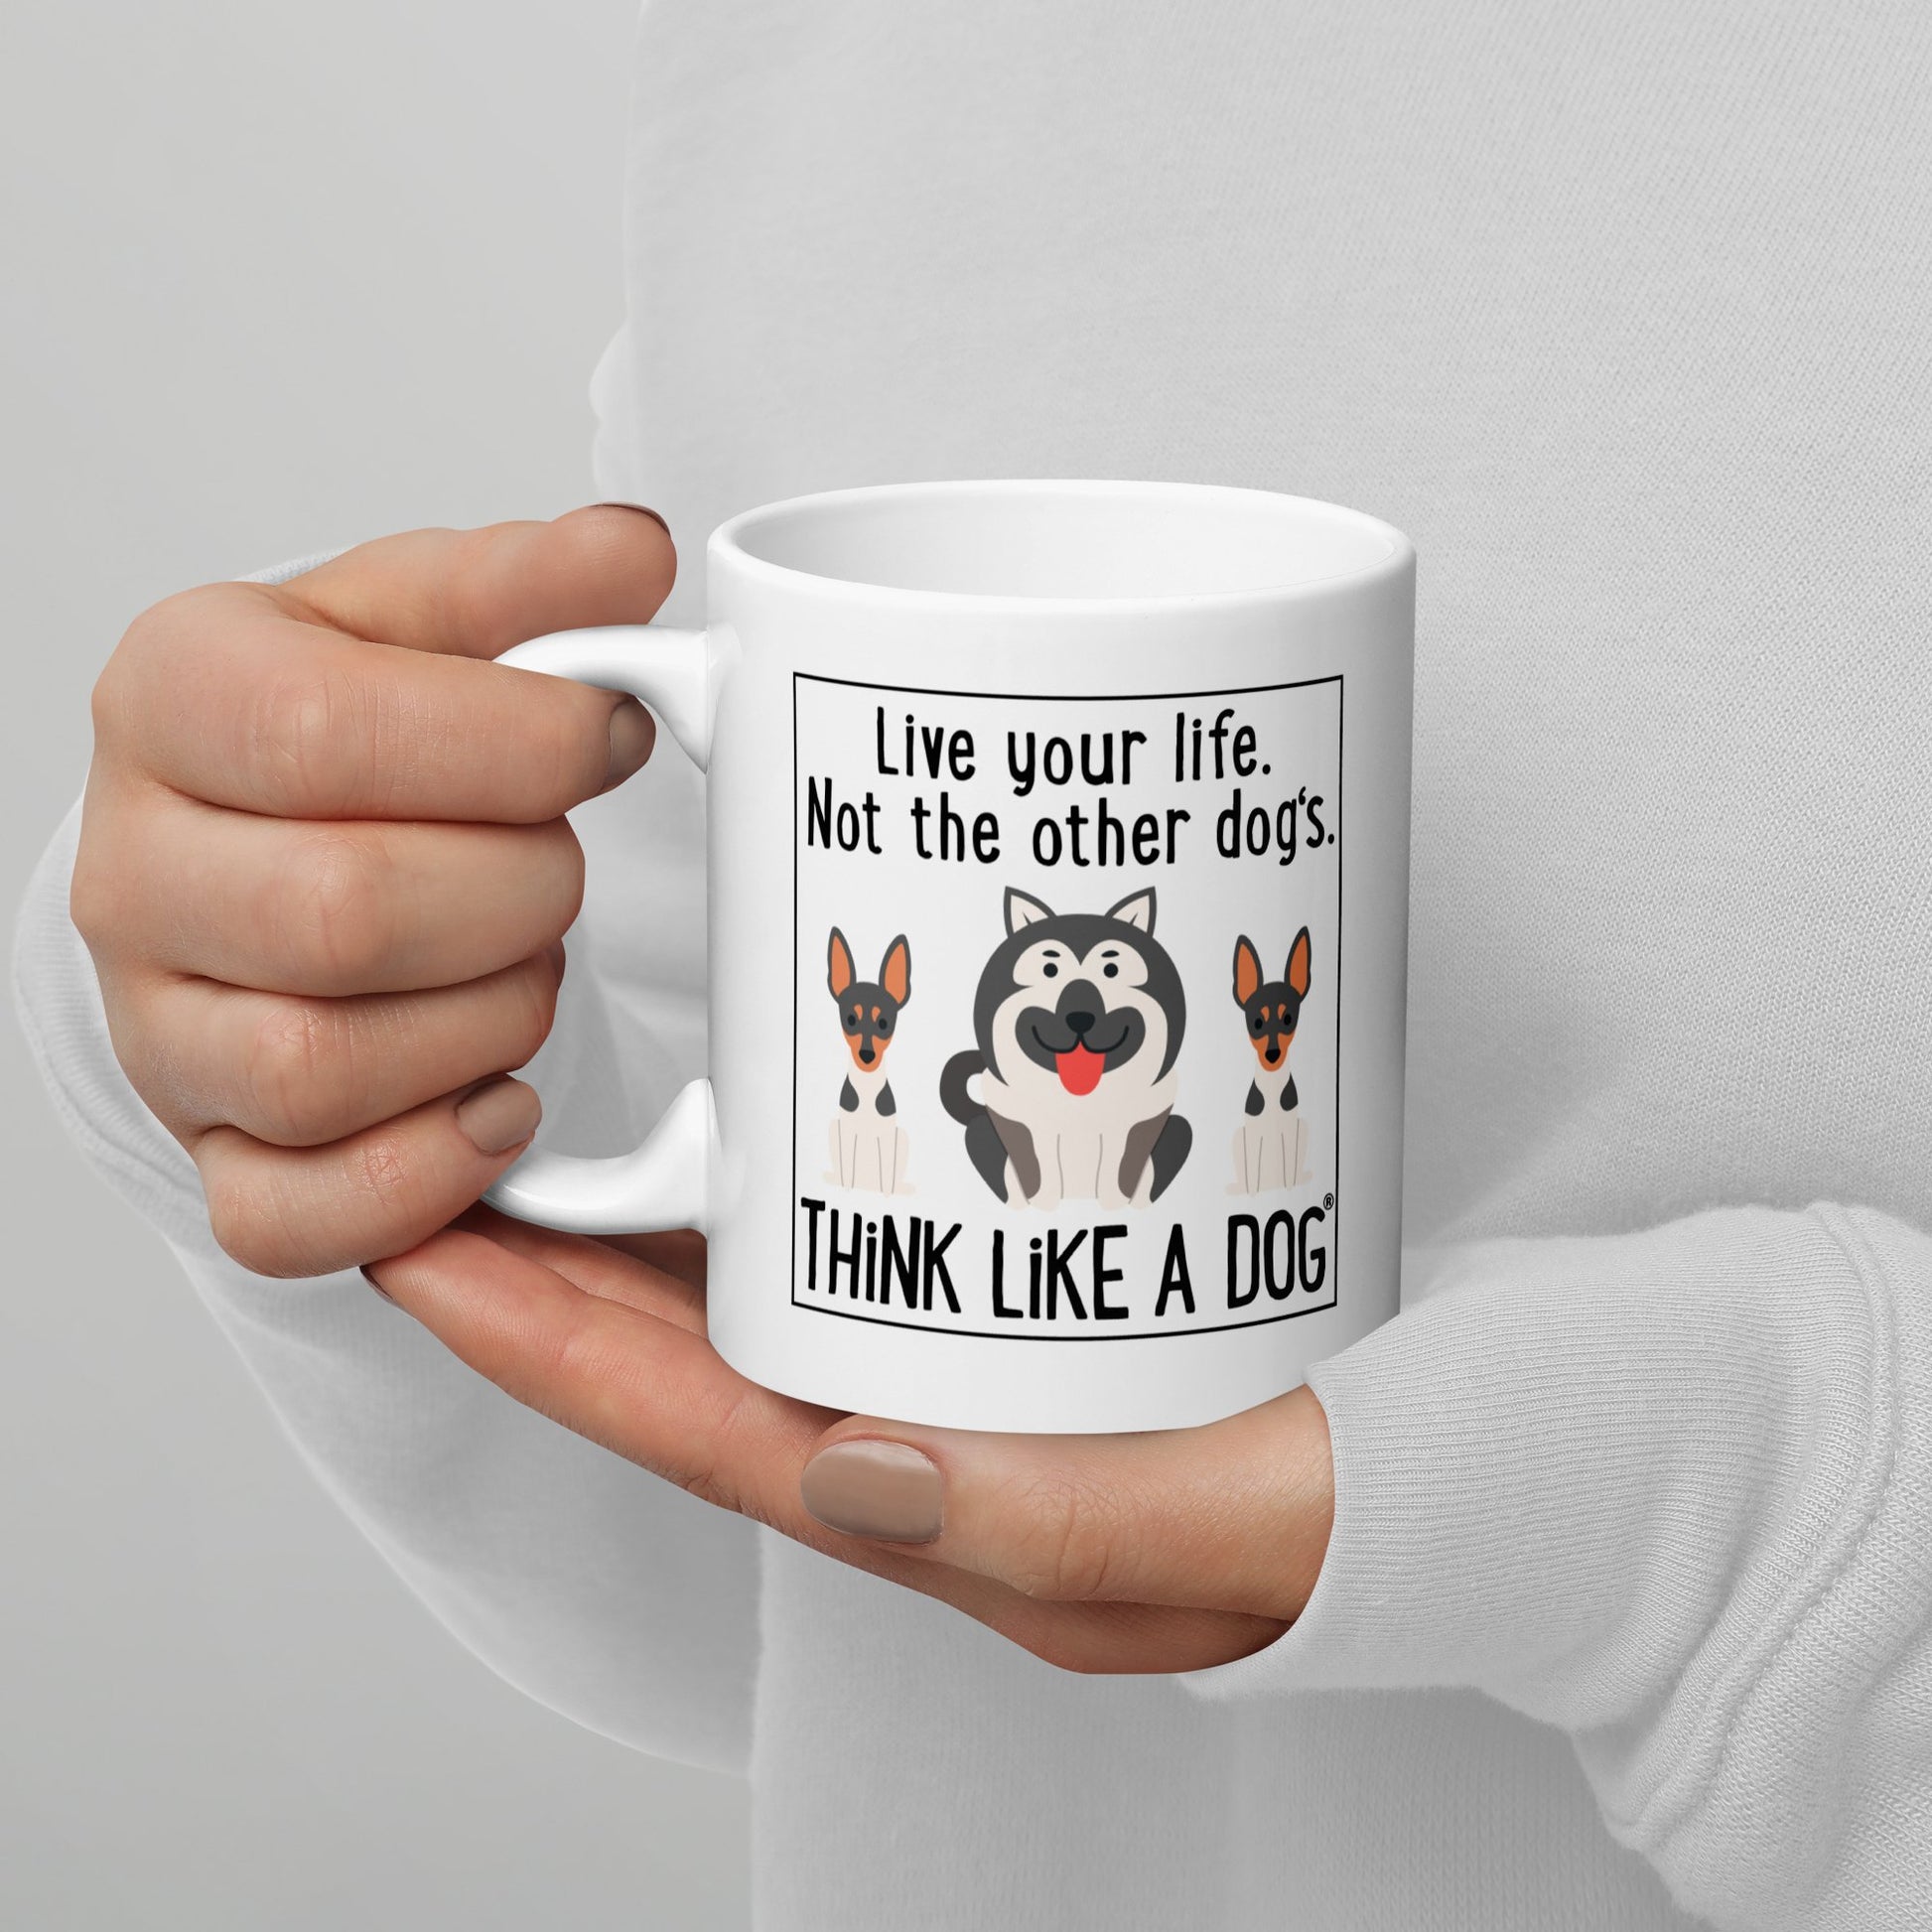 A person holding a THiNK LiKE A DOG® white glossy mug with the text "live your life, not the other dog's. think like a dog" and cartoon dogs.